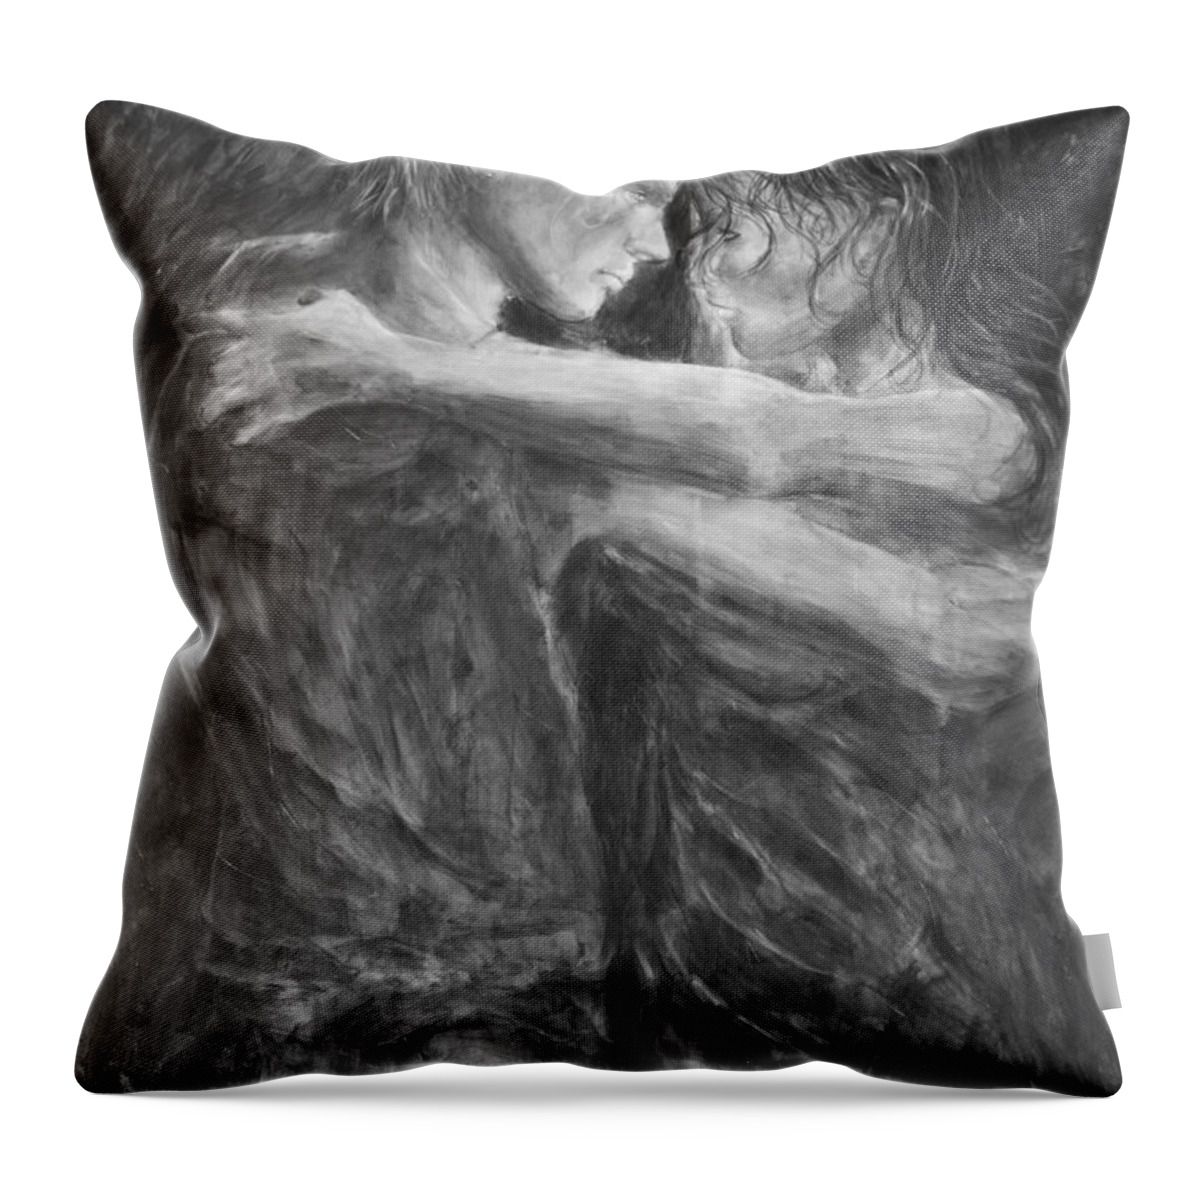  Shades Of Grey Throw Pillow featuring the painting Shades of Grey - Tango Dancers by Nik Helbig